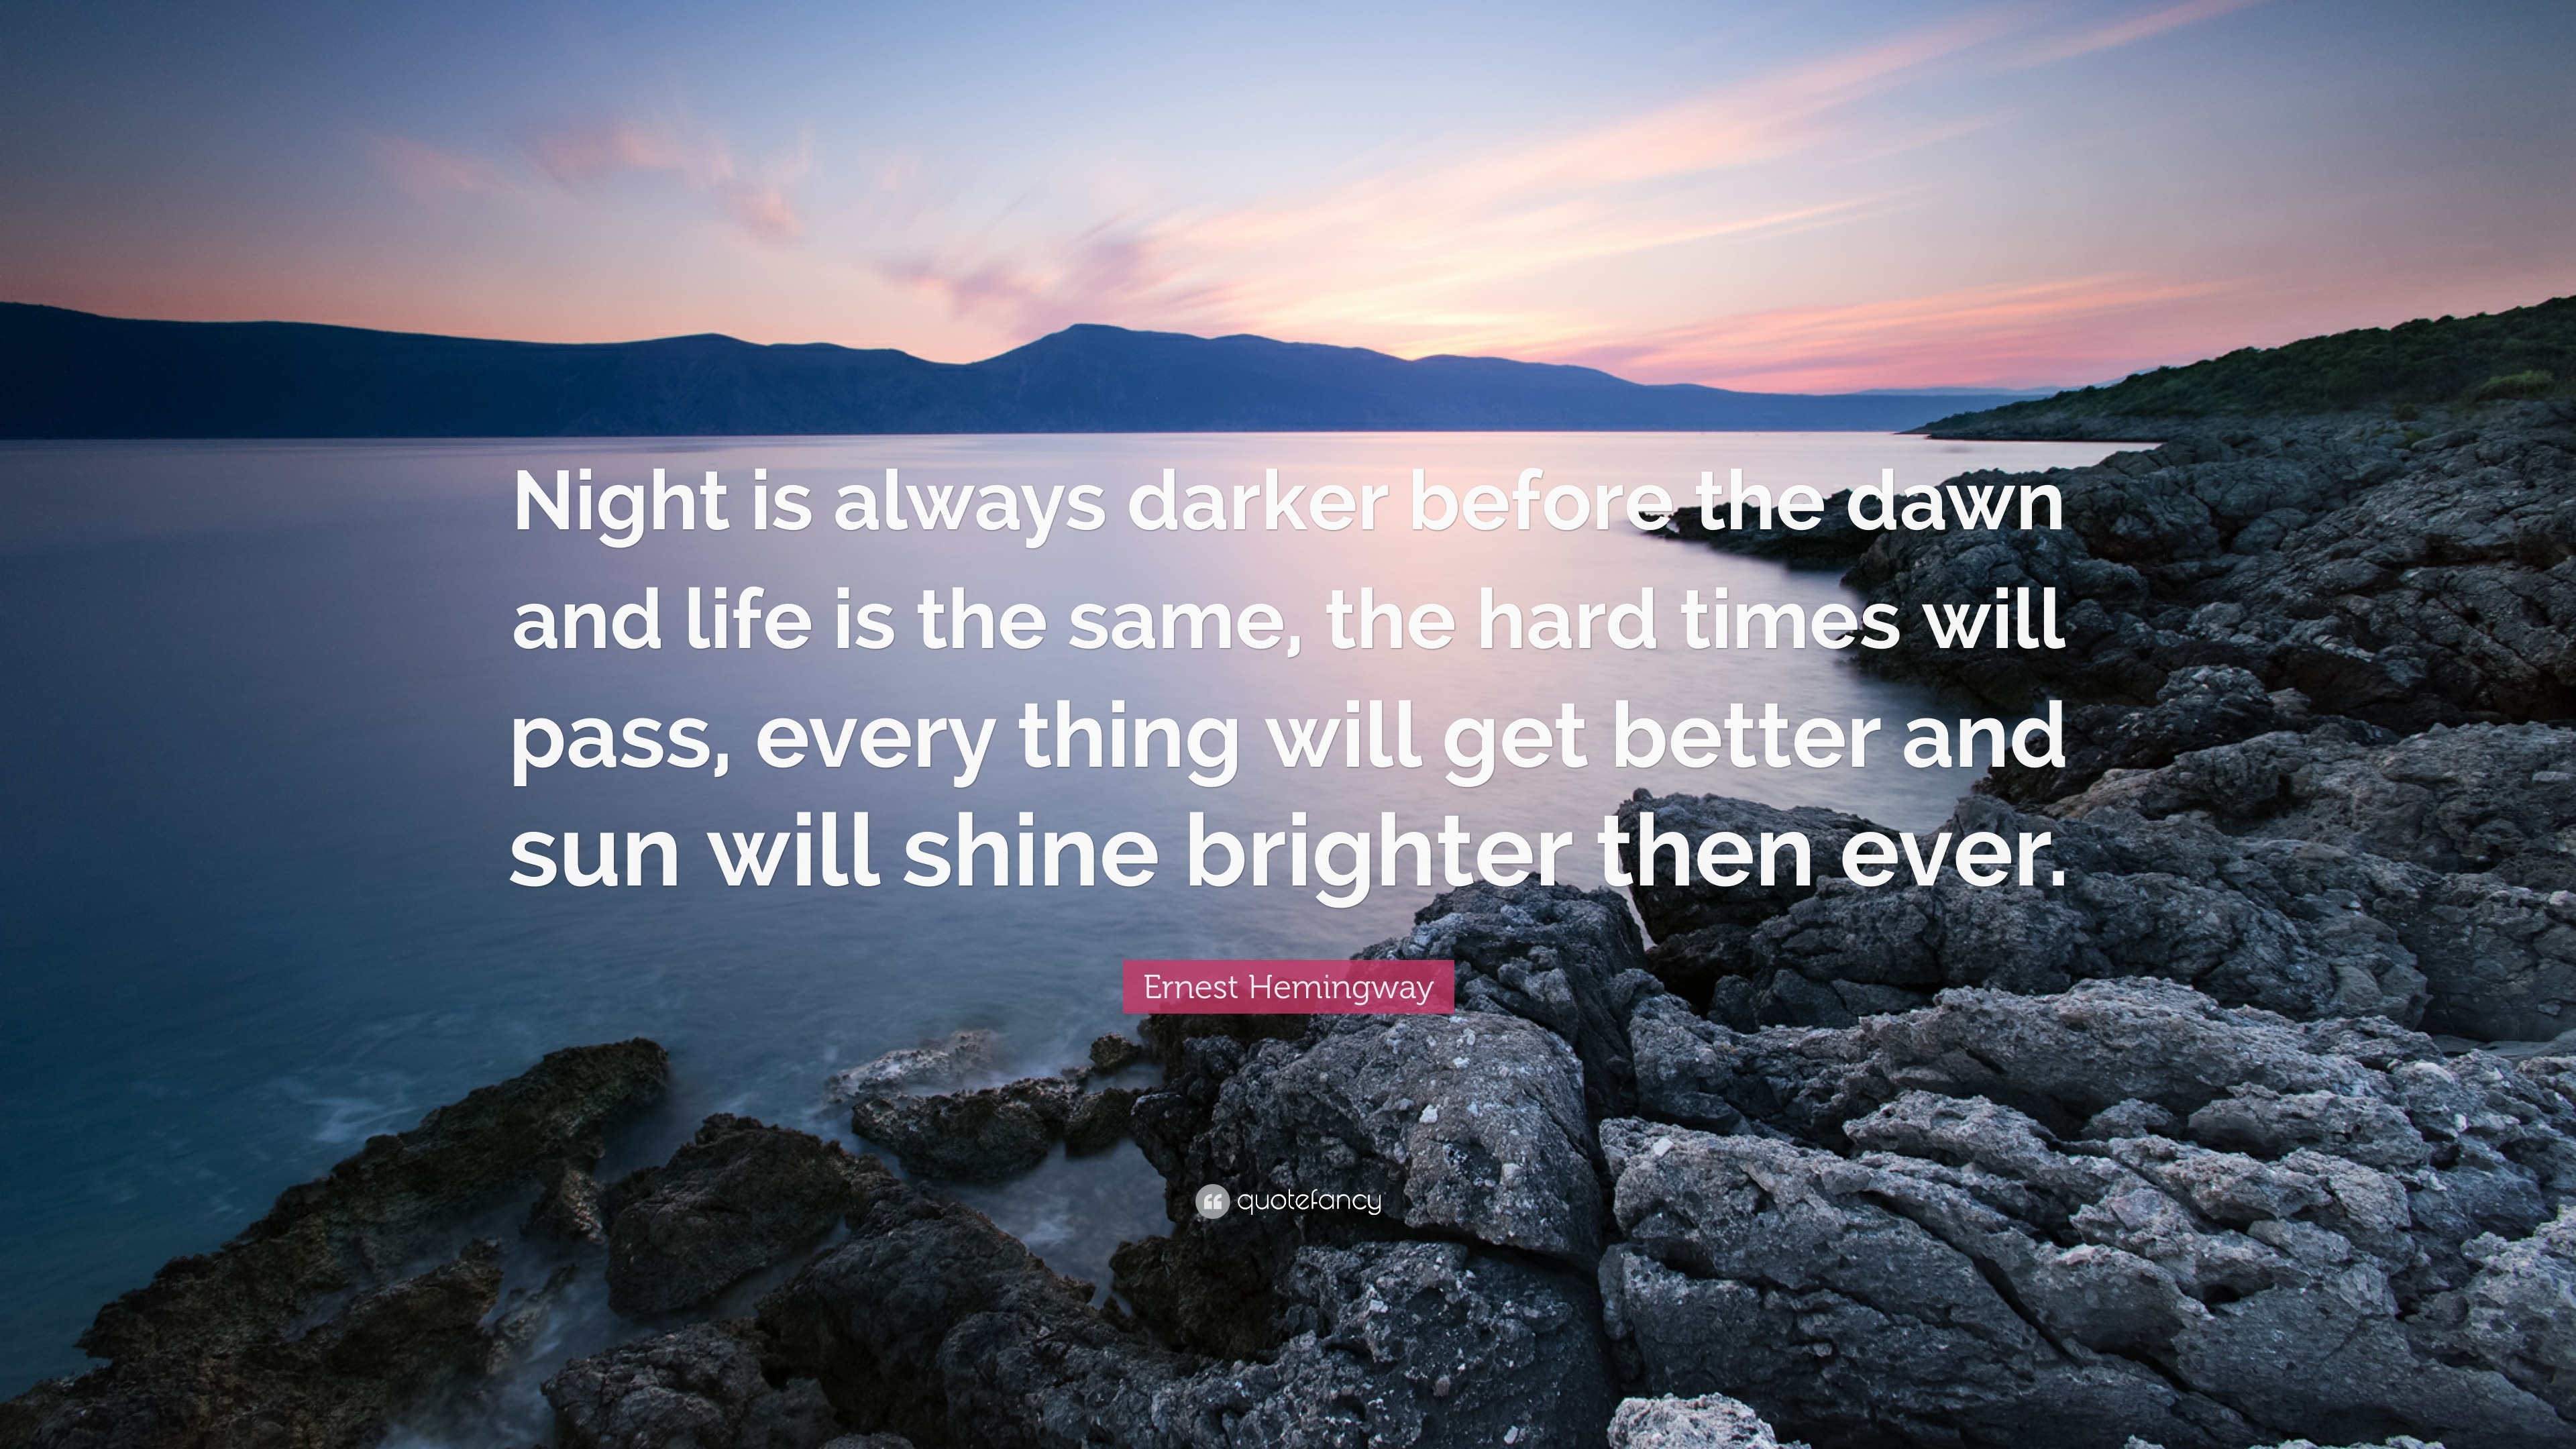 Ernest Hemingway Quote “Night is always darker before the dawn and life is the